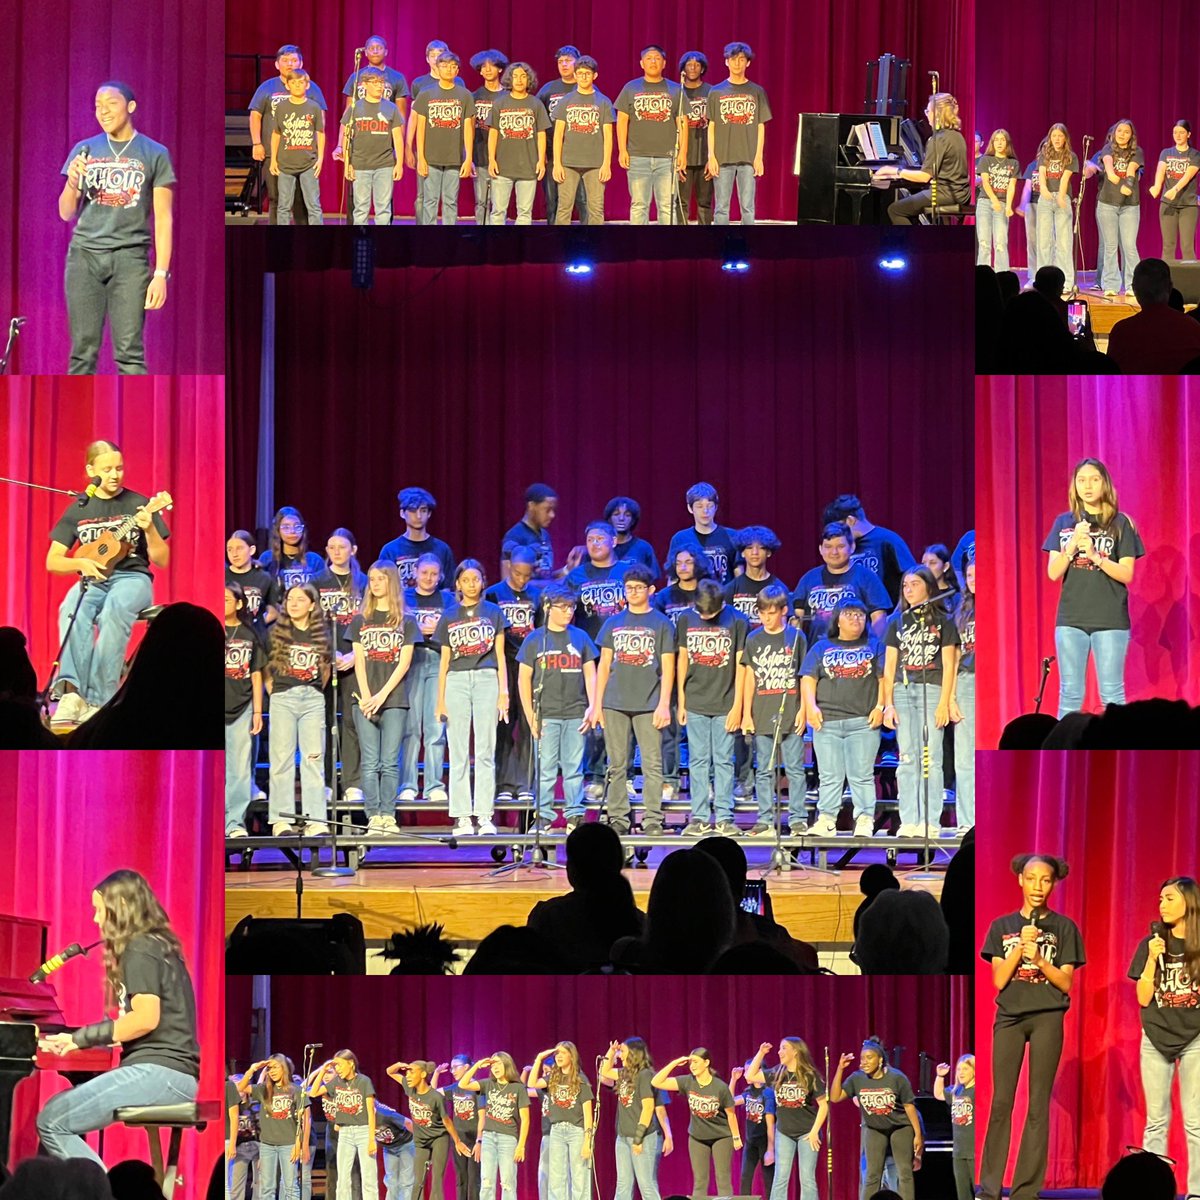 A Million Dreams were celebrated on stage tonight with our Varsity Pop Show. What a treat to see and celebrate our incredibly talented students tonight! #ourstudentsrock #talentedstudents @CCISD_VPA @choir_scis